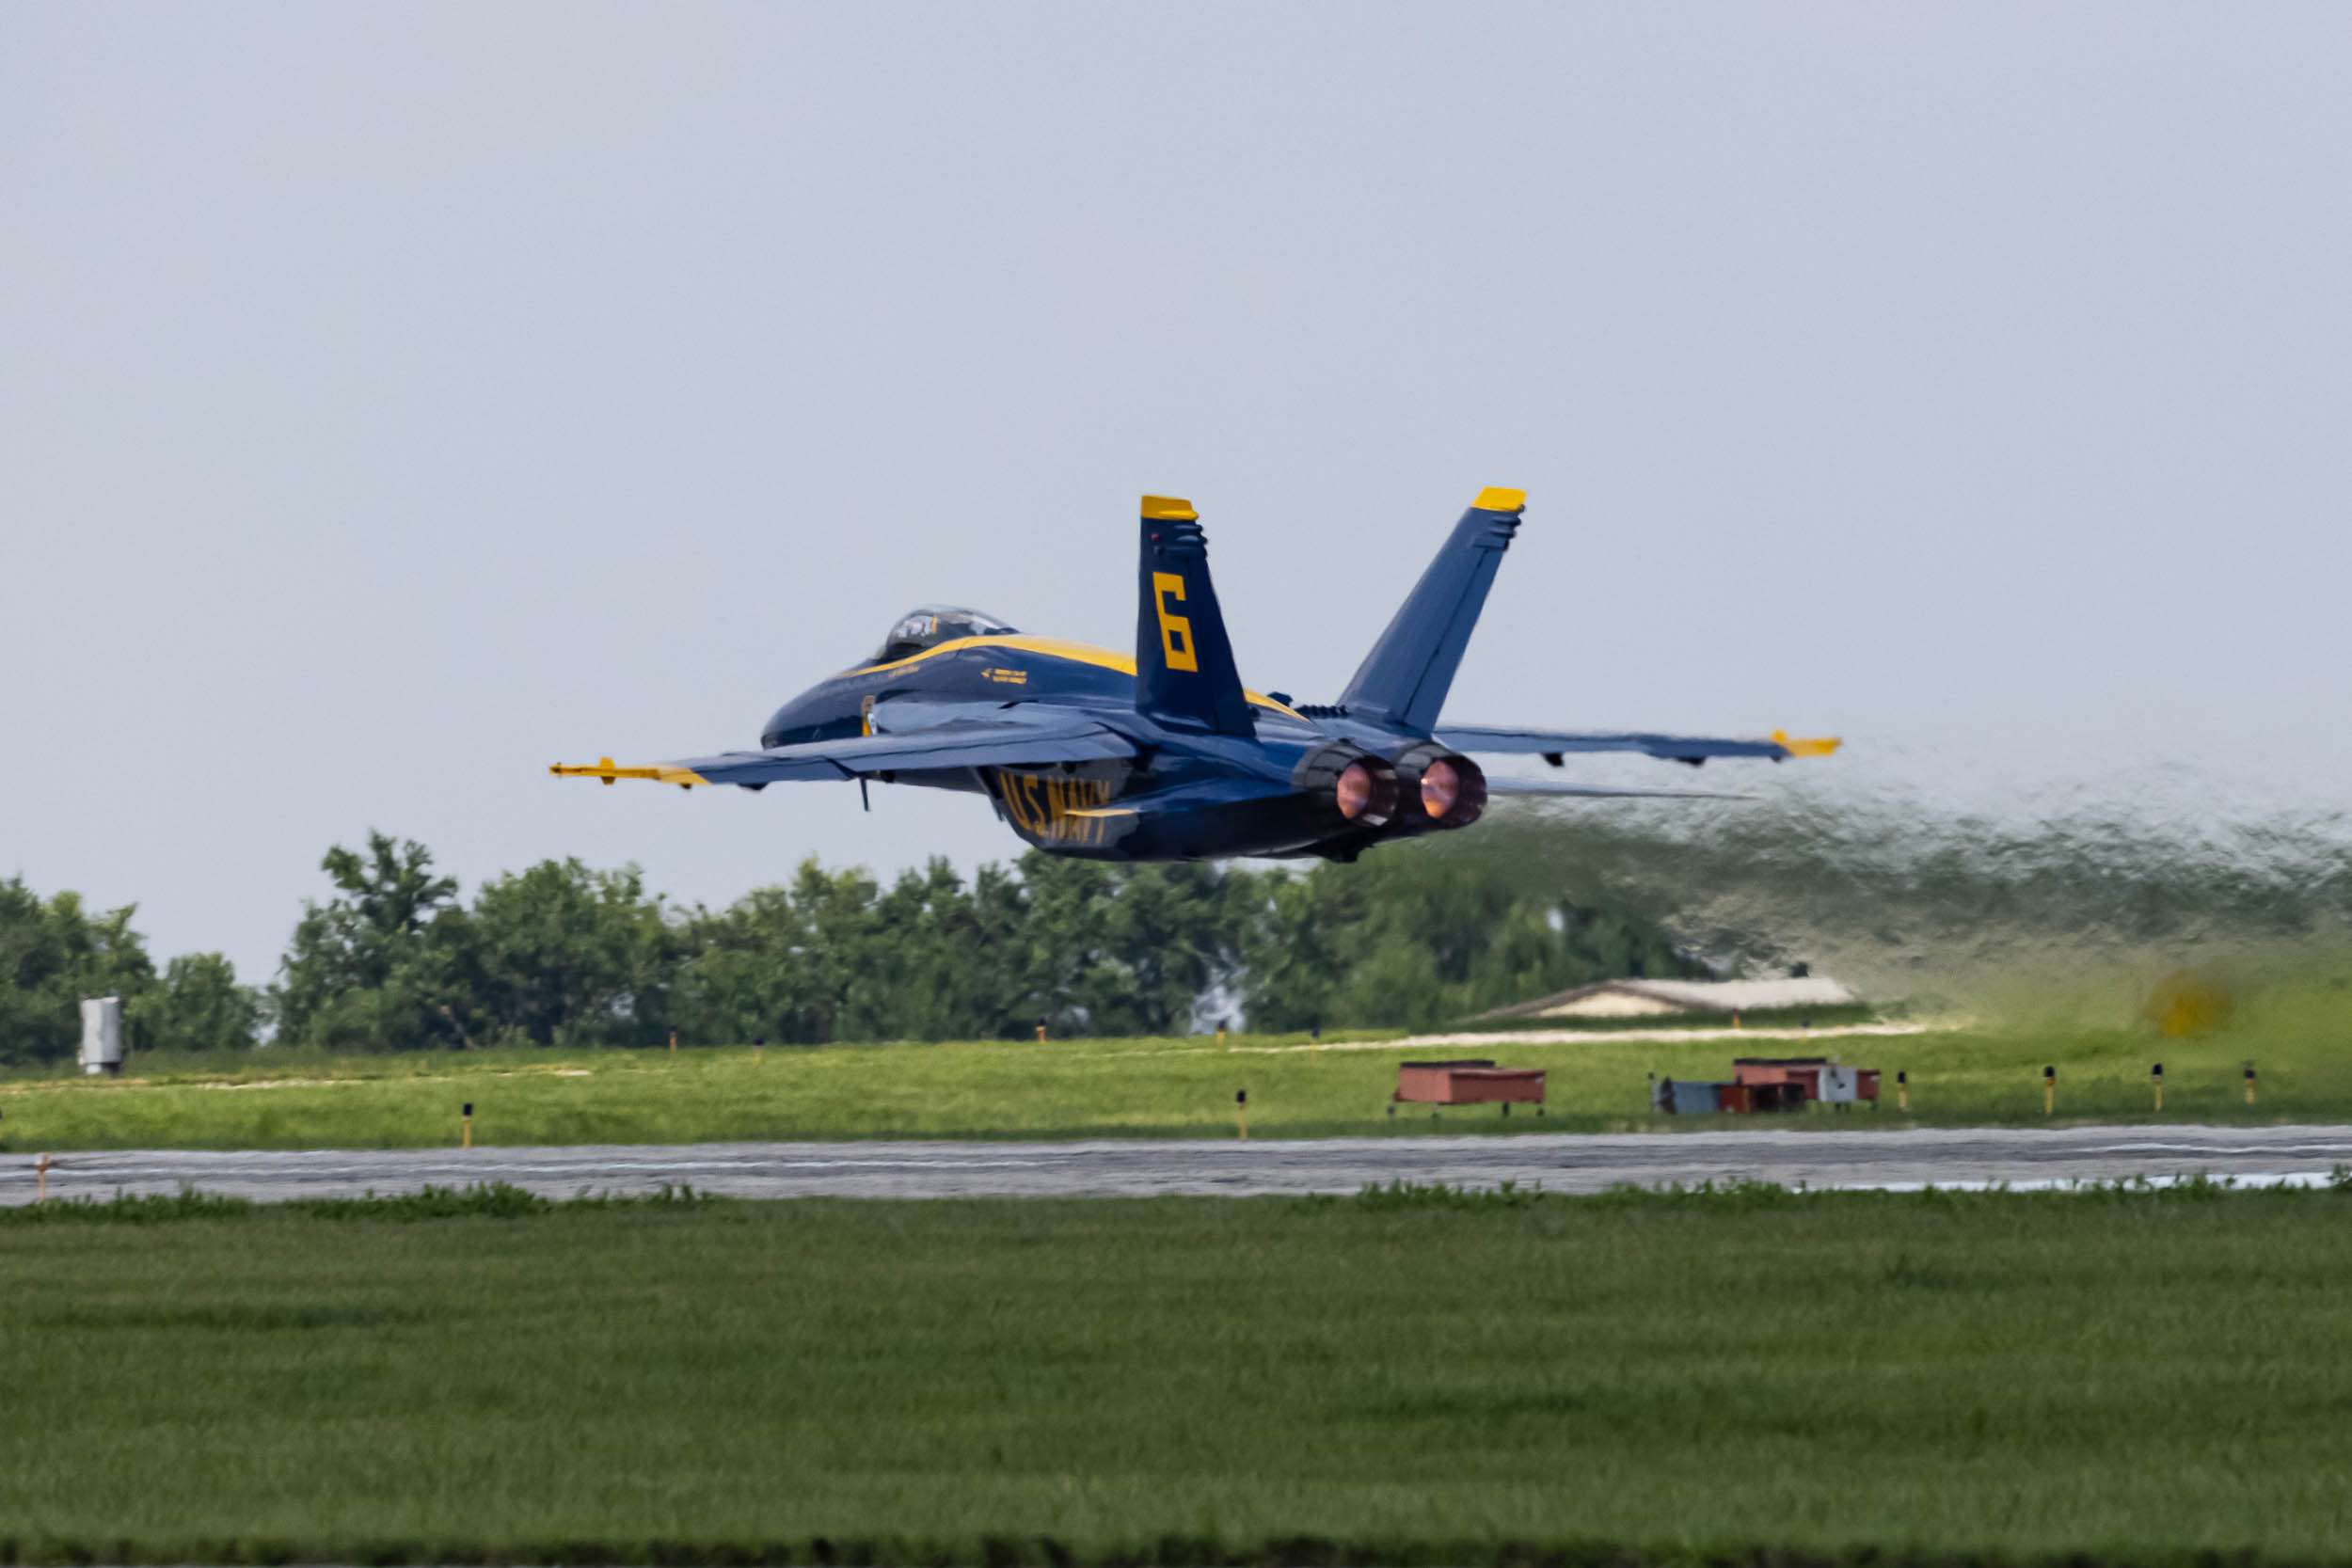 A US Navy Blue Angels jet flies only a few feet above the runway with full afterburner